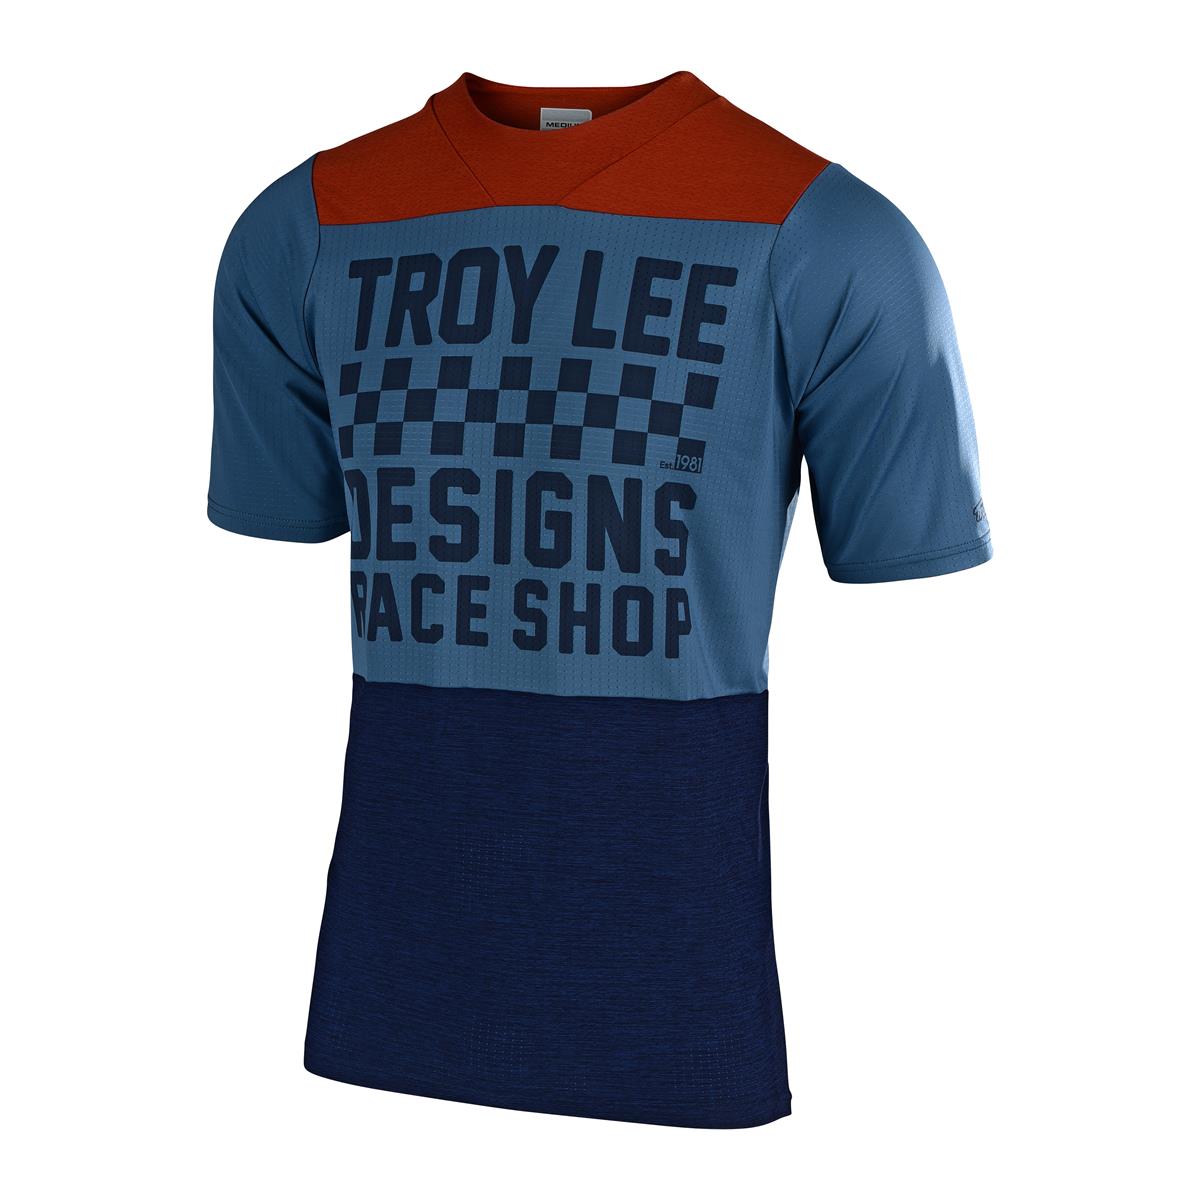 Troy Lee Designs Trail-Jersey Skyline Air Checkers - Heather Clay/Cadet